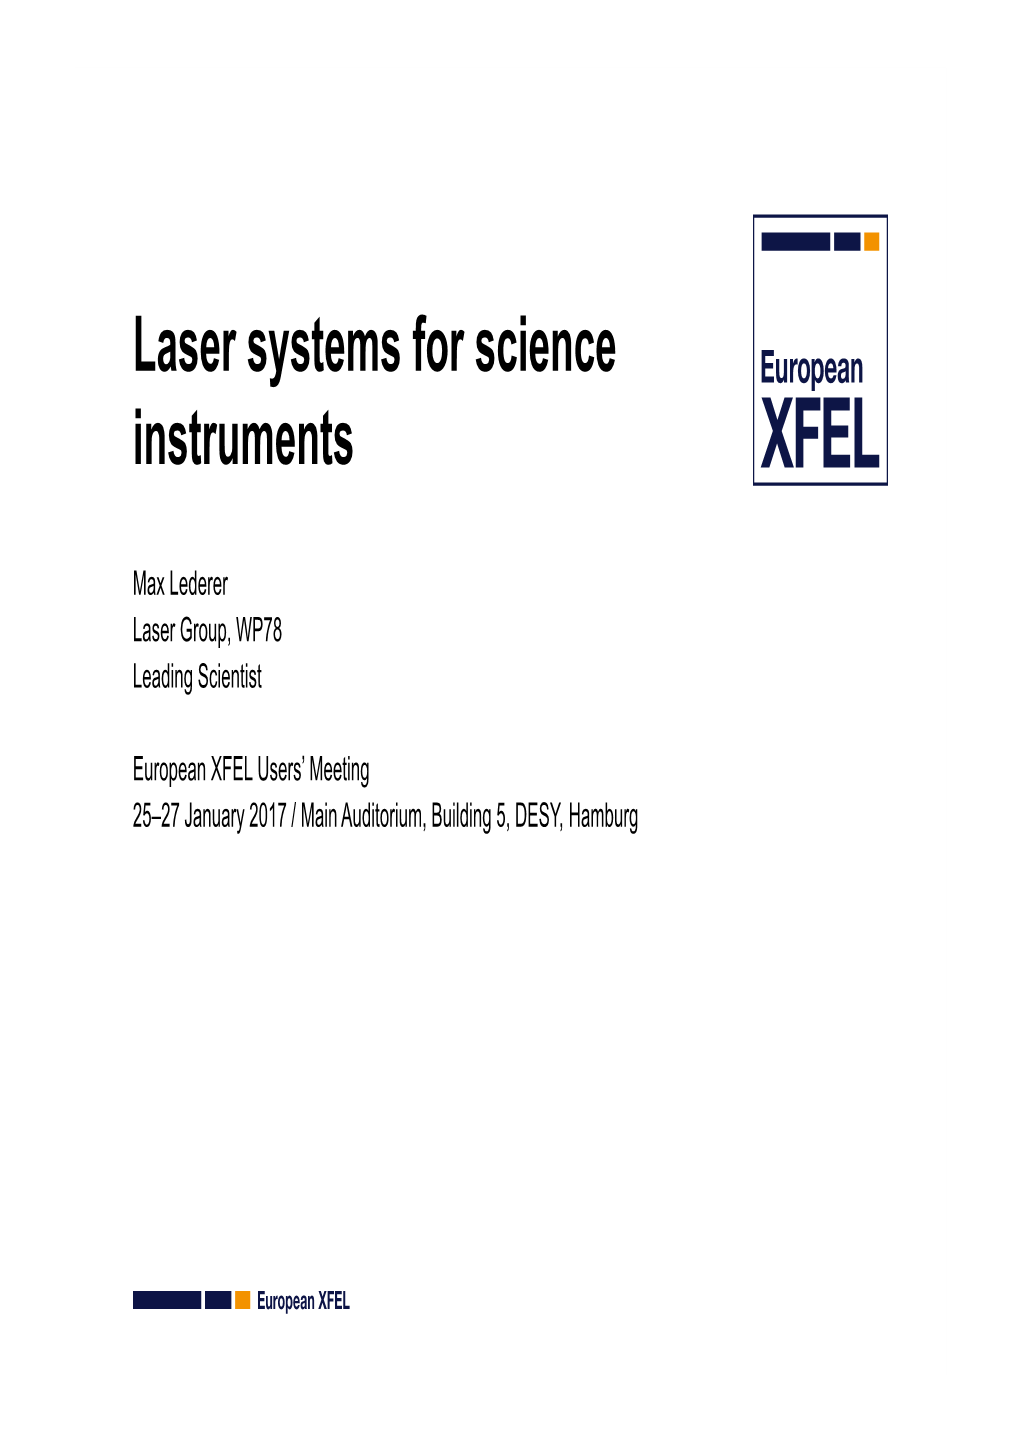 Laser Systems for Science Instruments